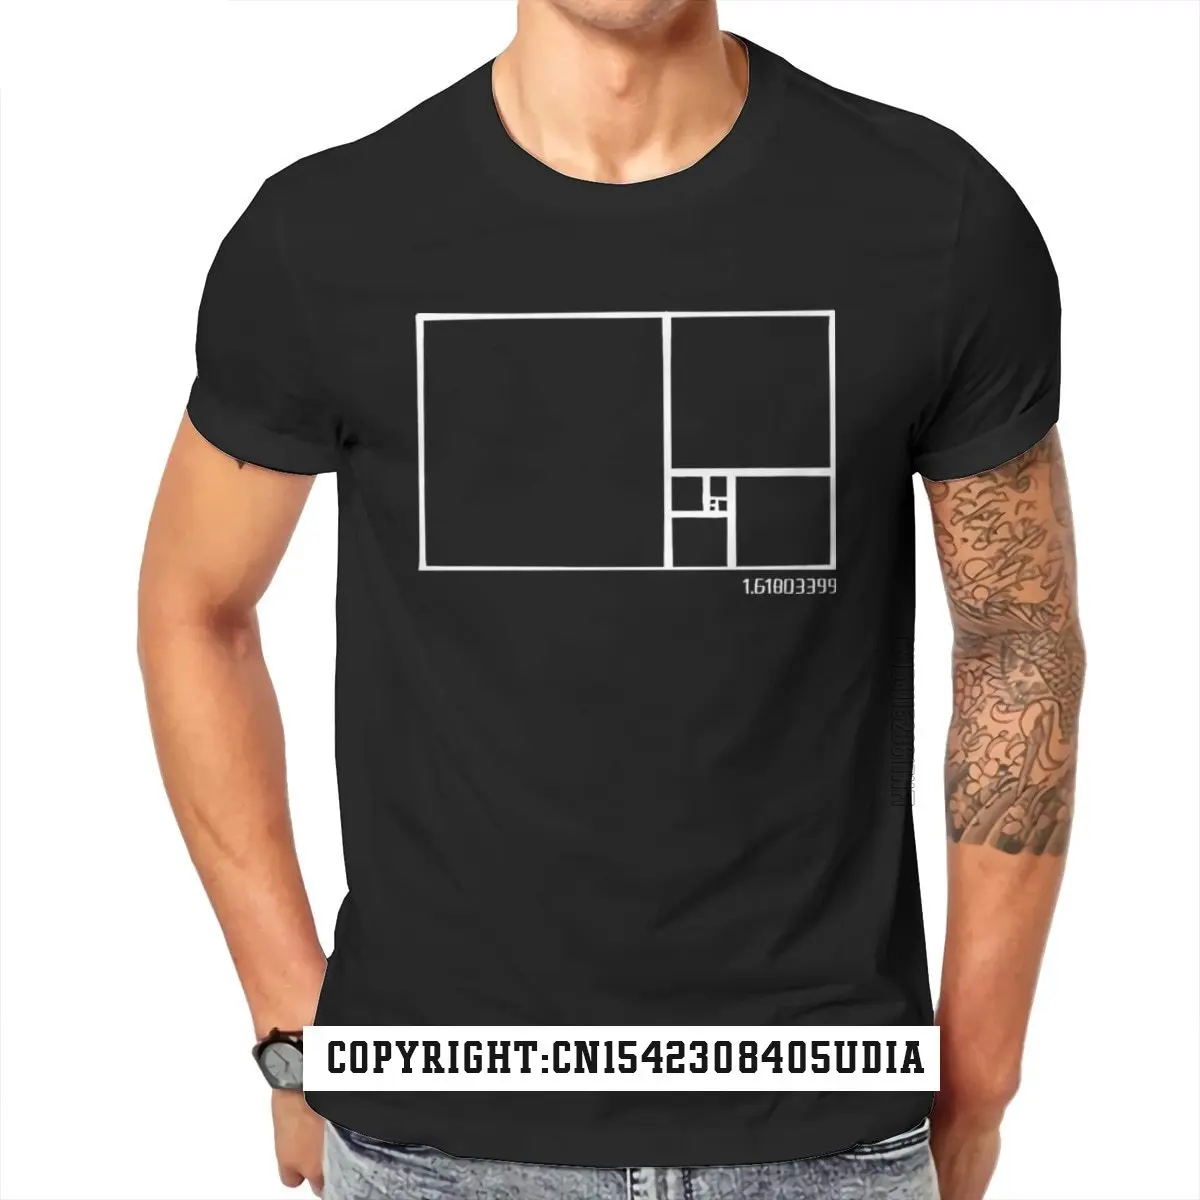 Golden Ratio Architect And Architecture Students Mens Tall T-Shirt Male Unisex Tees Tops & Tees For Men Popular Tshirts